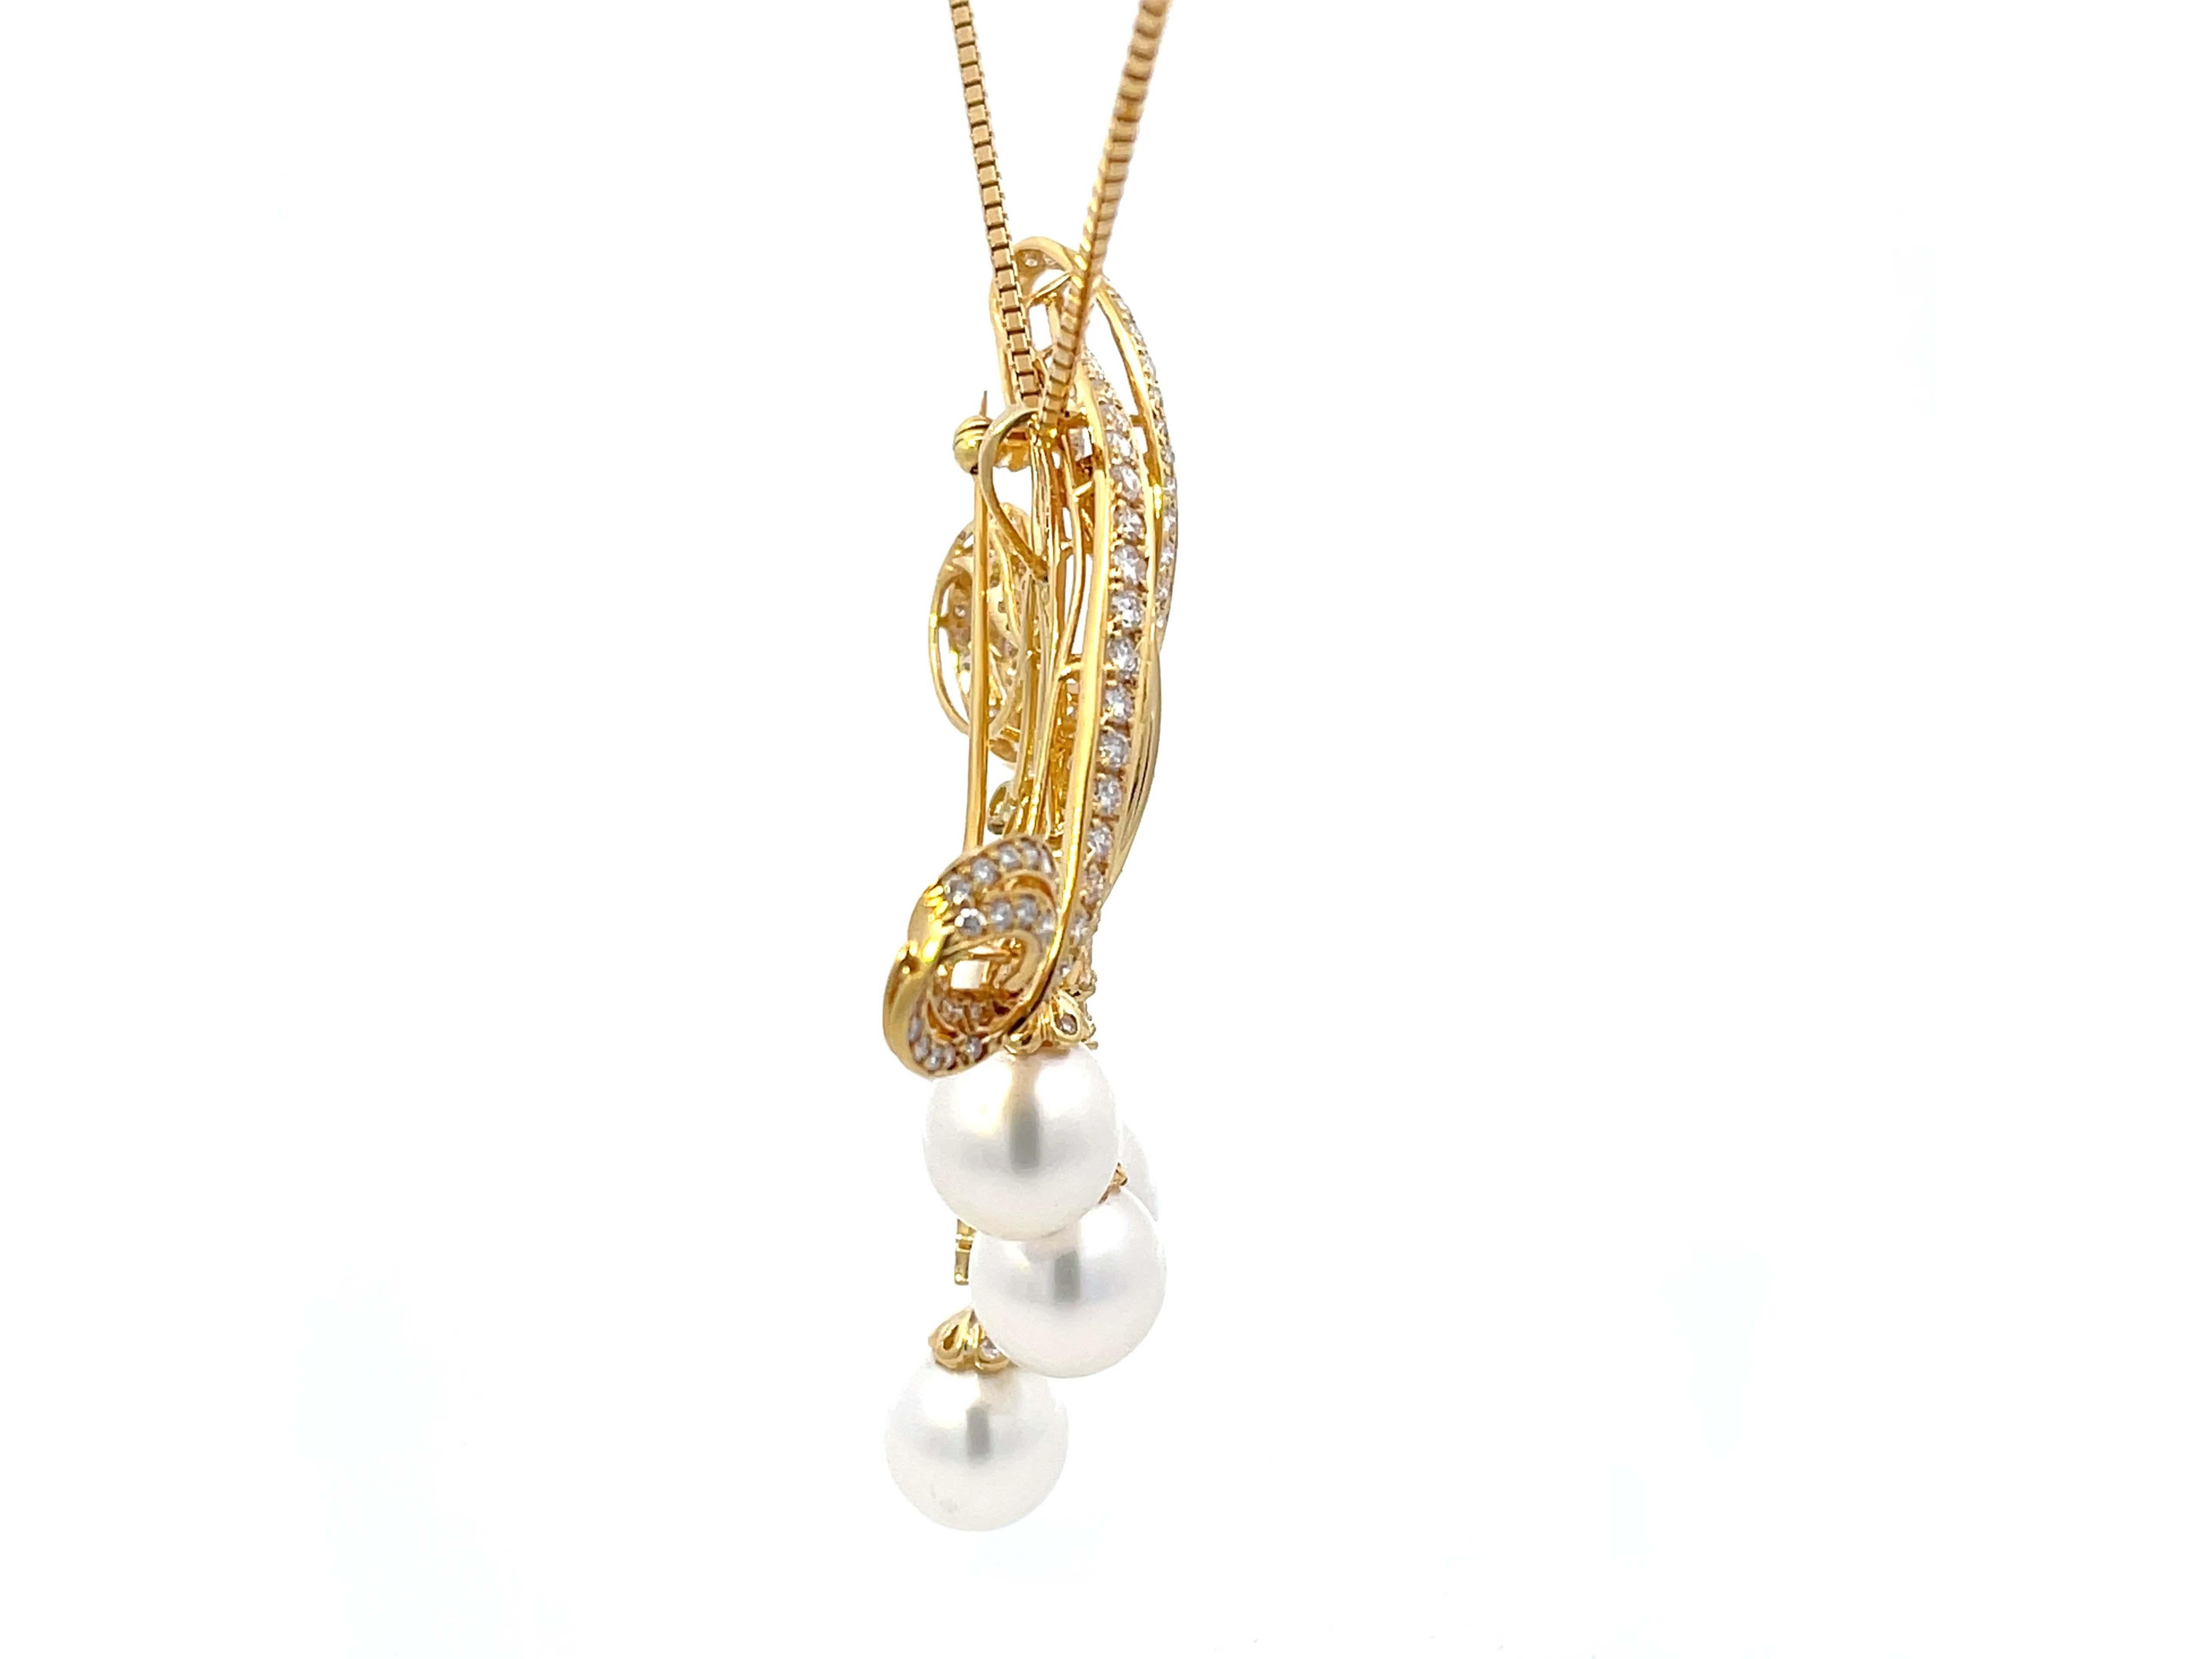 Large Diamond and Pearl Necklace in 18k Yellow Gold In Excellent Condition For Sale In Honolulu, HI